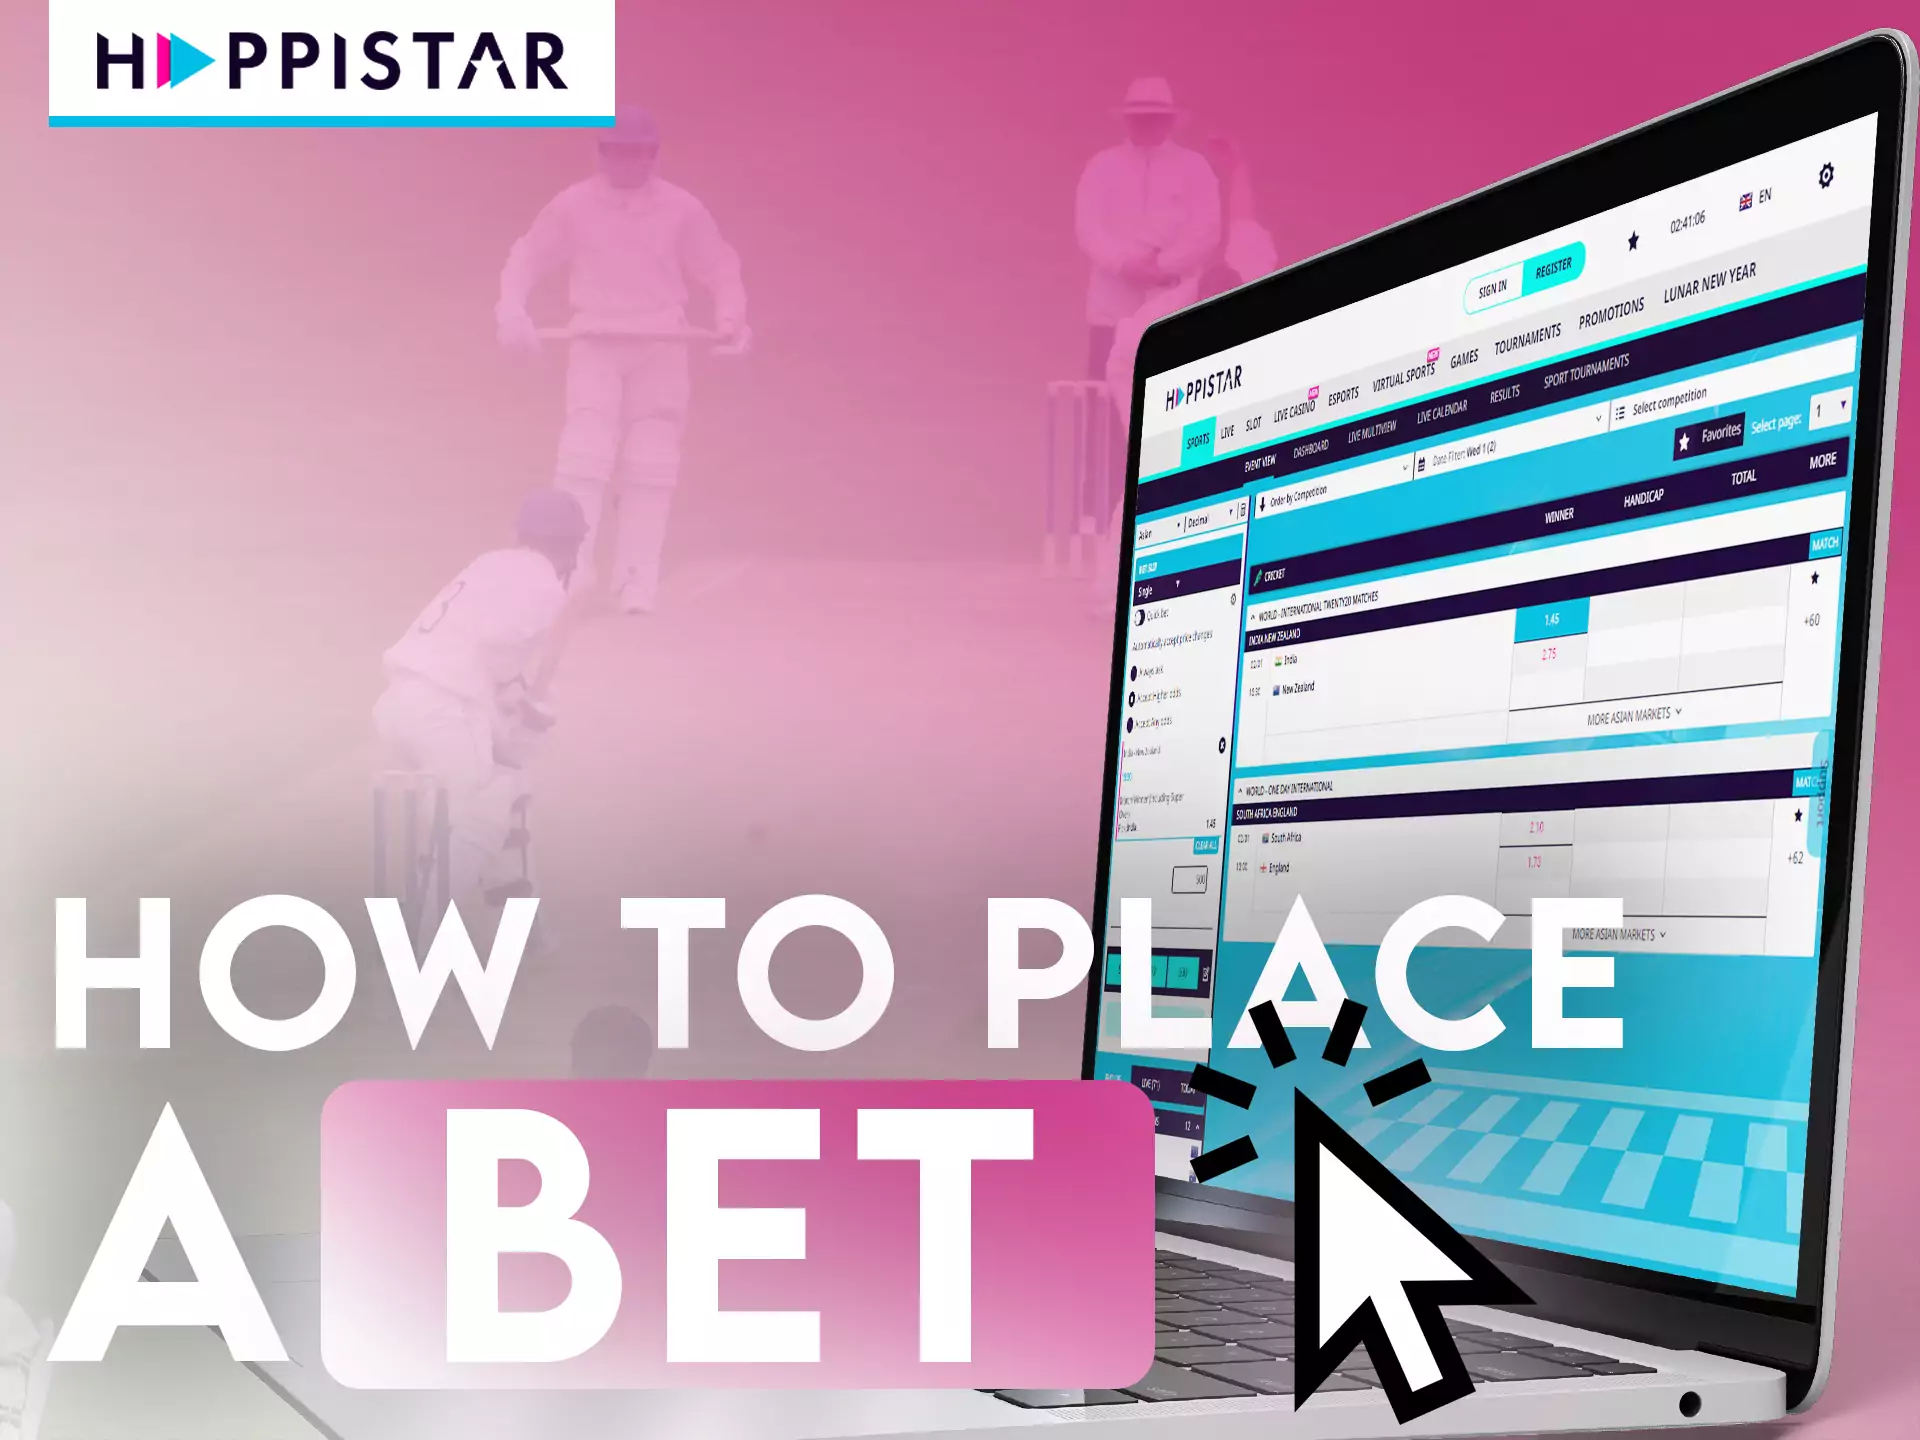 Start betting on Happistar by choosing an event.